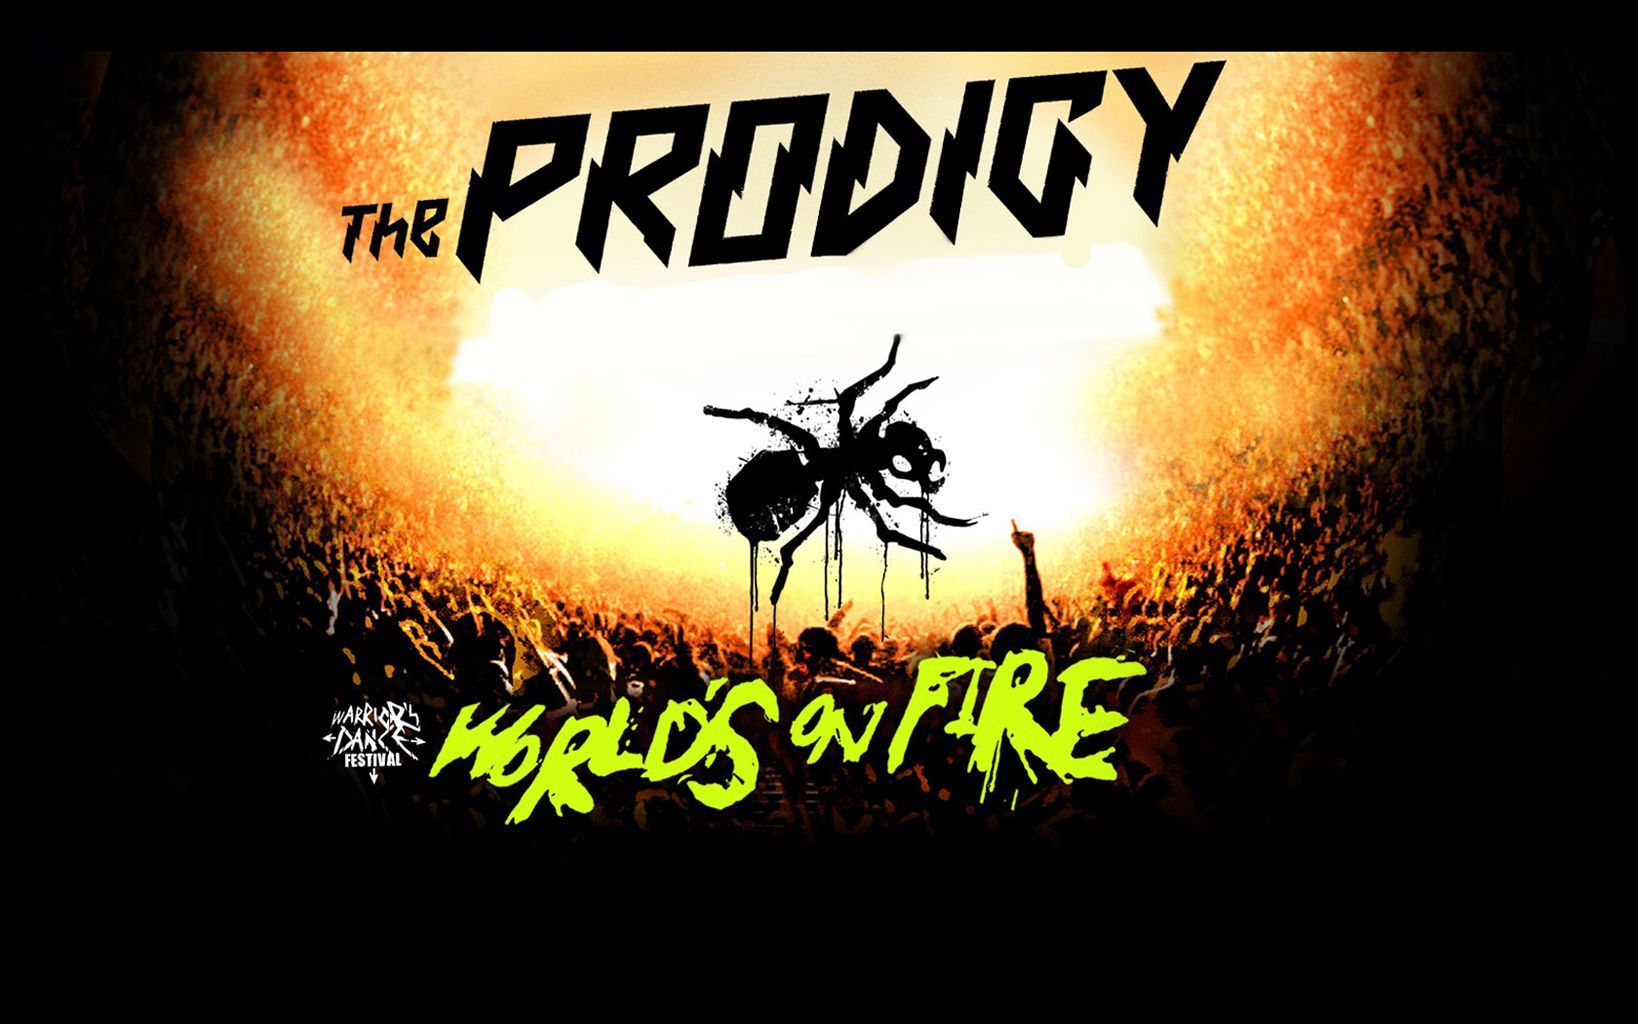 Fan Made The Prodigy Wallpaper by Maikel 001 The Prodigy Fanboy